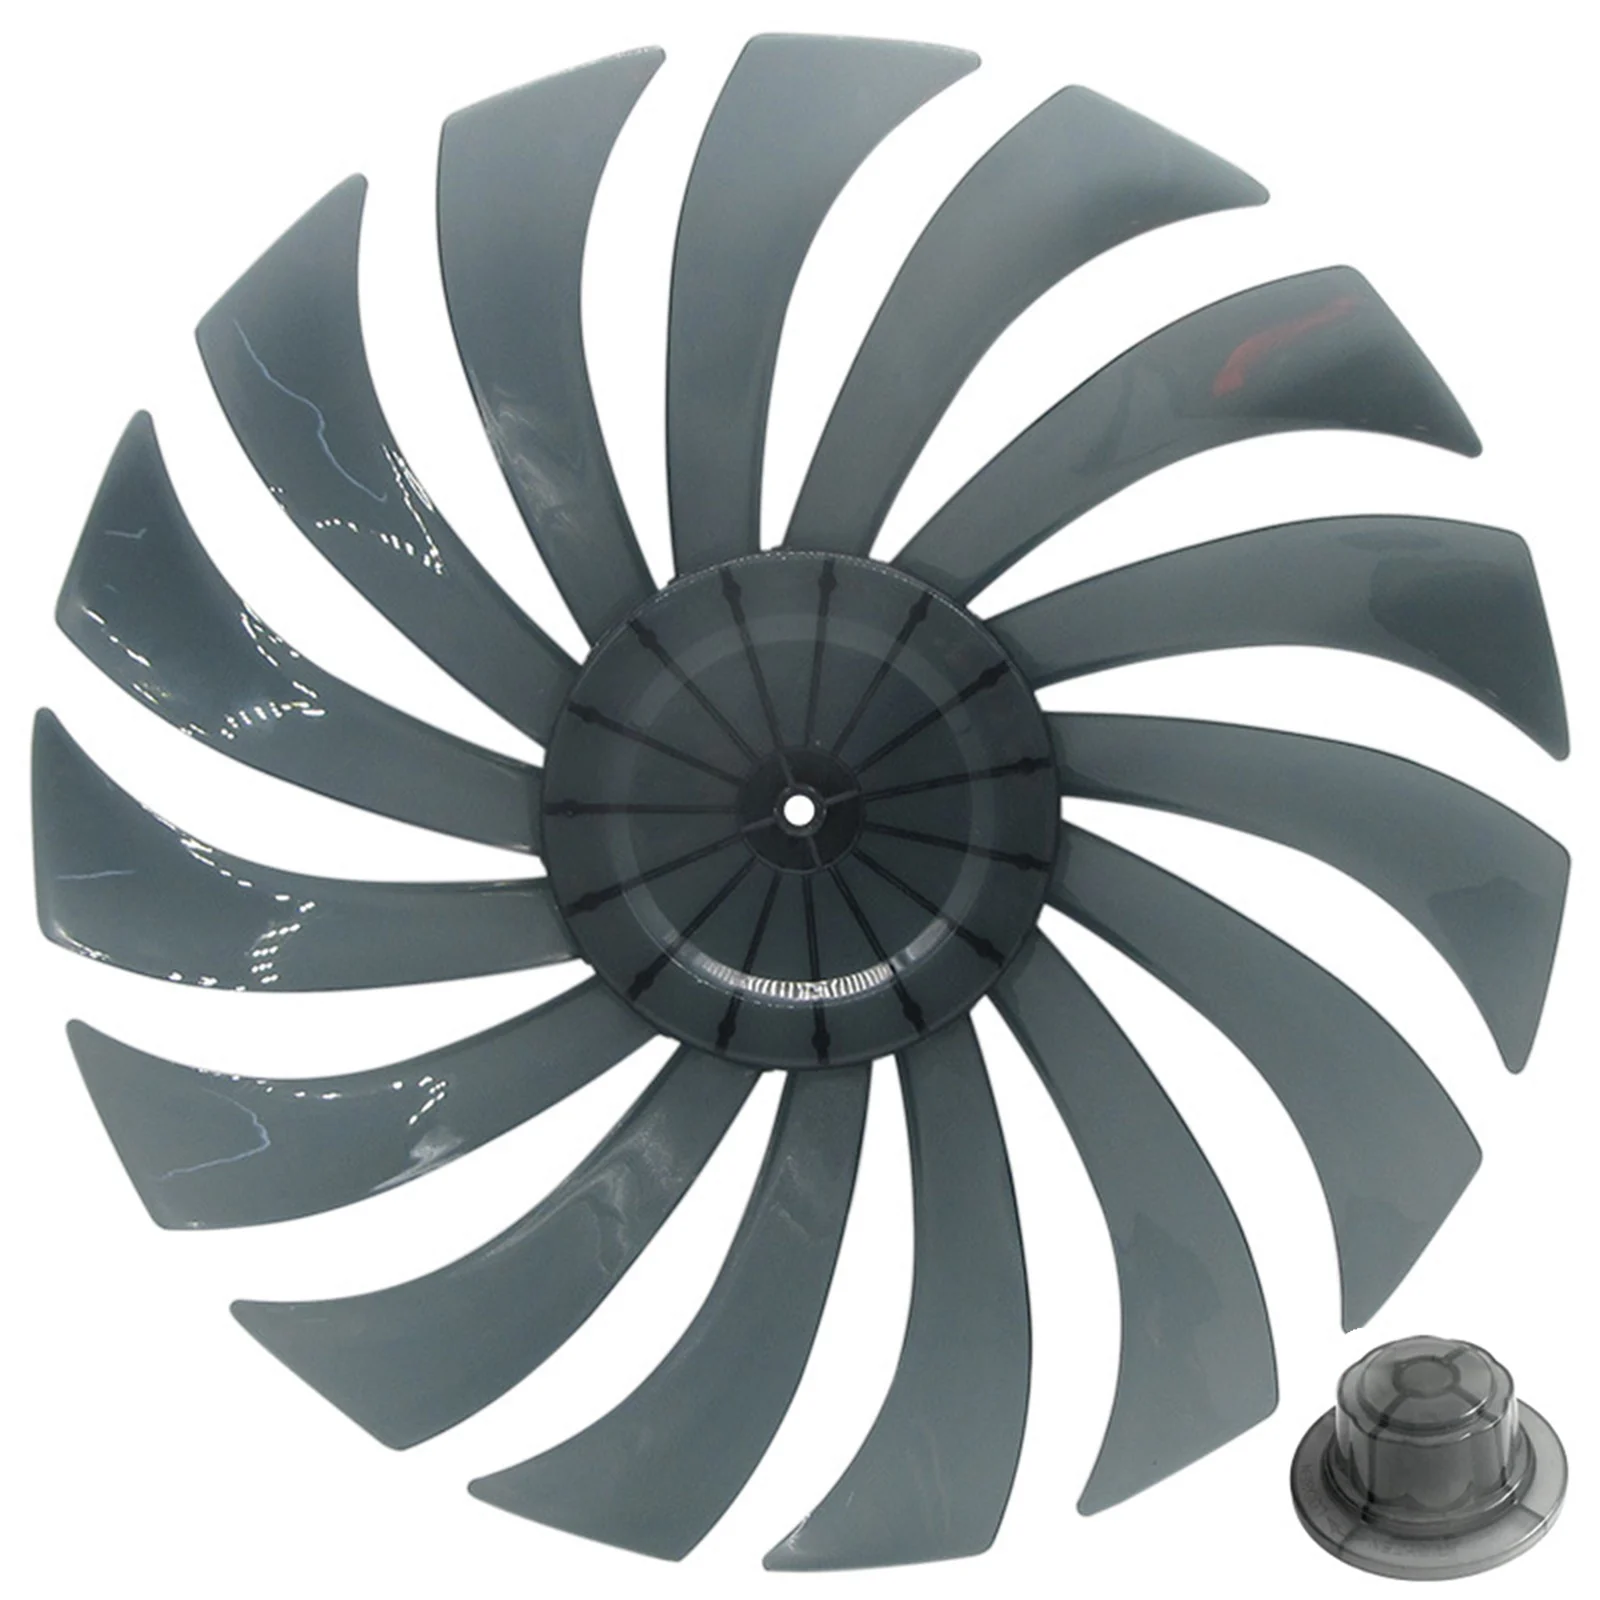 

Durable 14 Inch Plastic Fan Blades with 15 Blade Design and Nut Cover Replacement Parts for Standing Fans and Table Fans